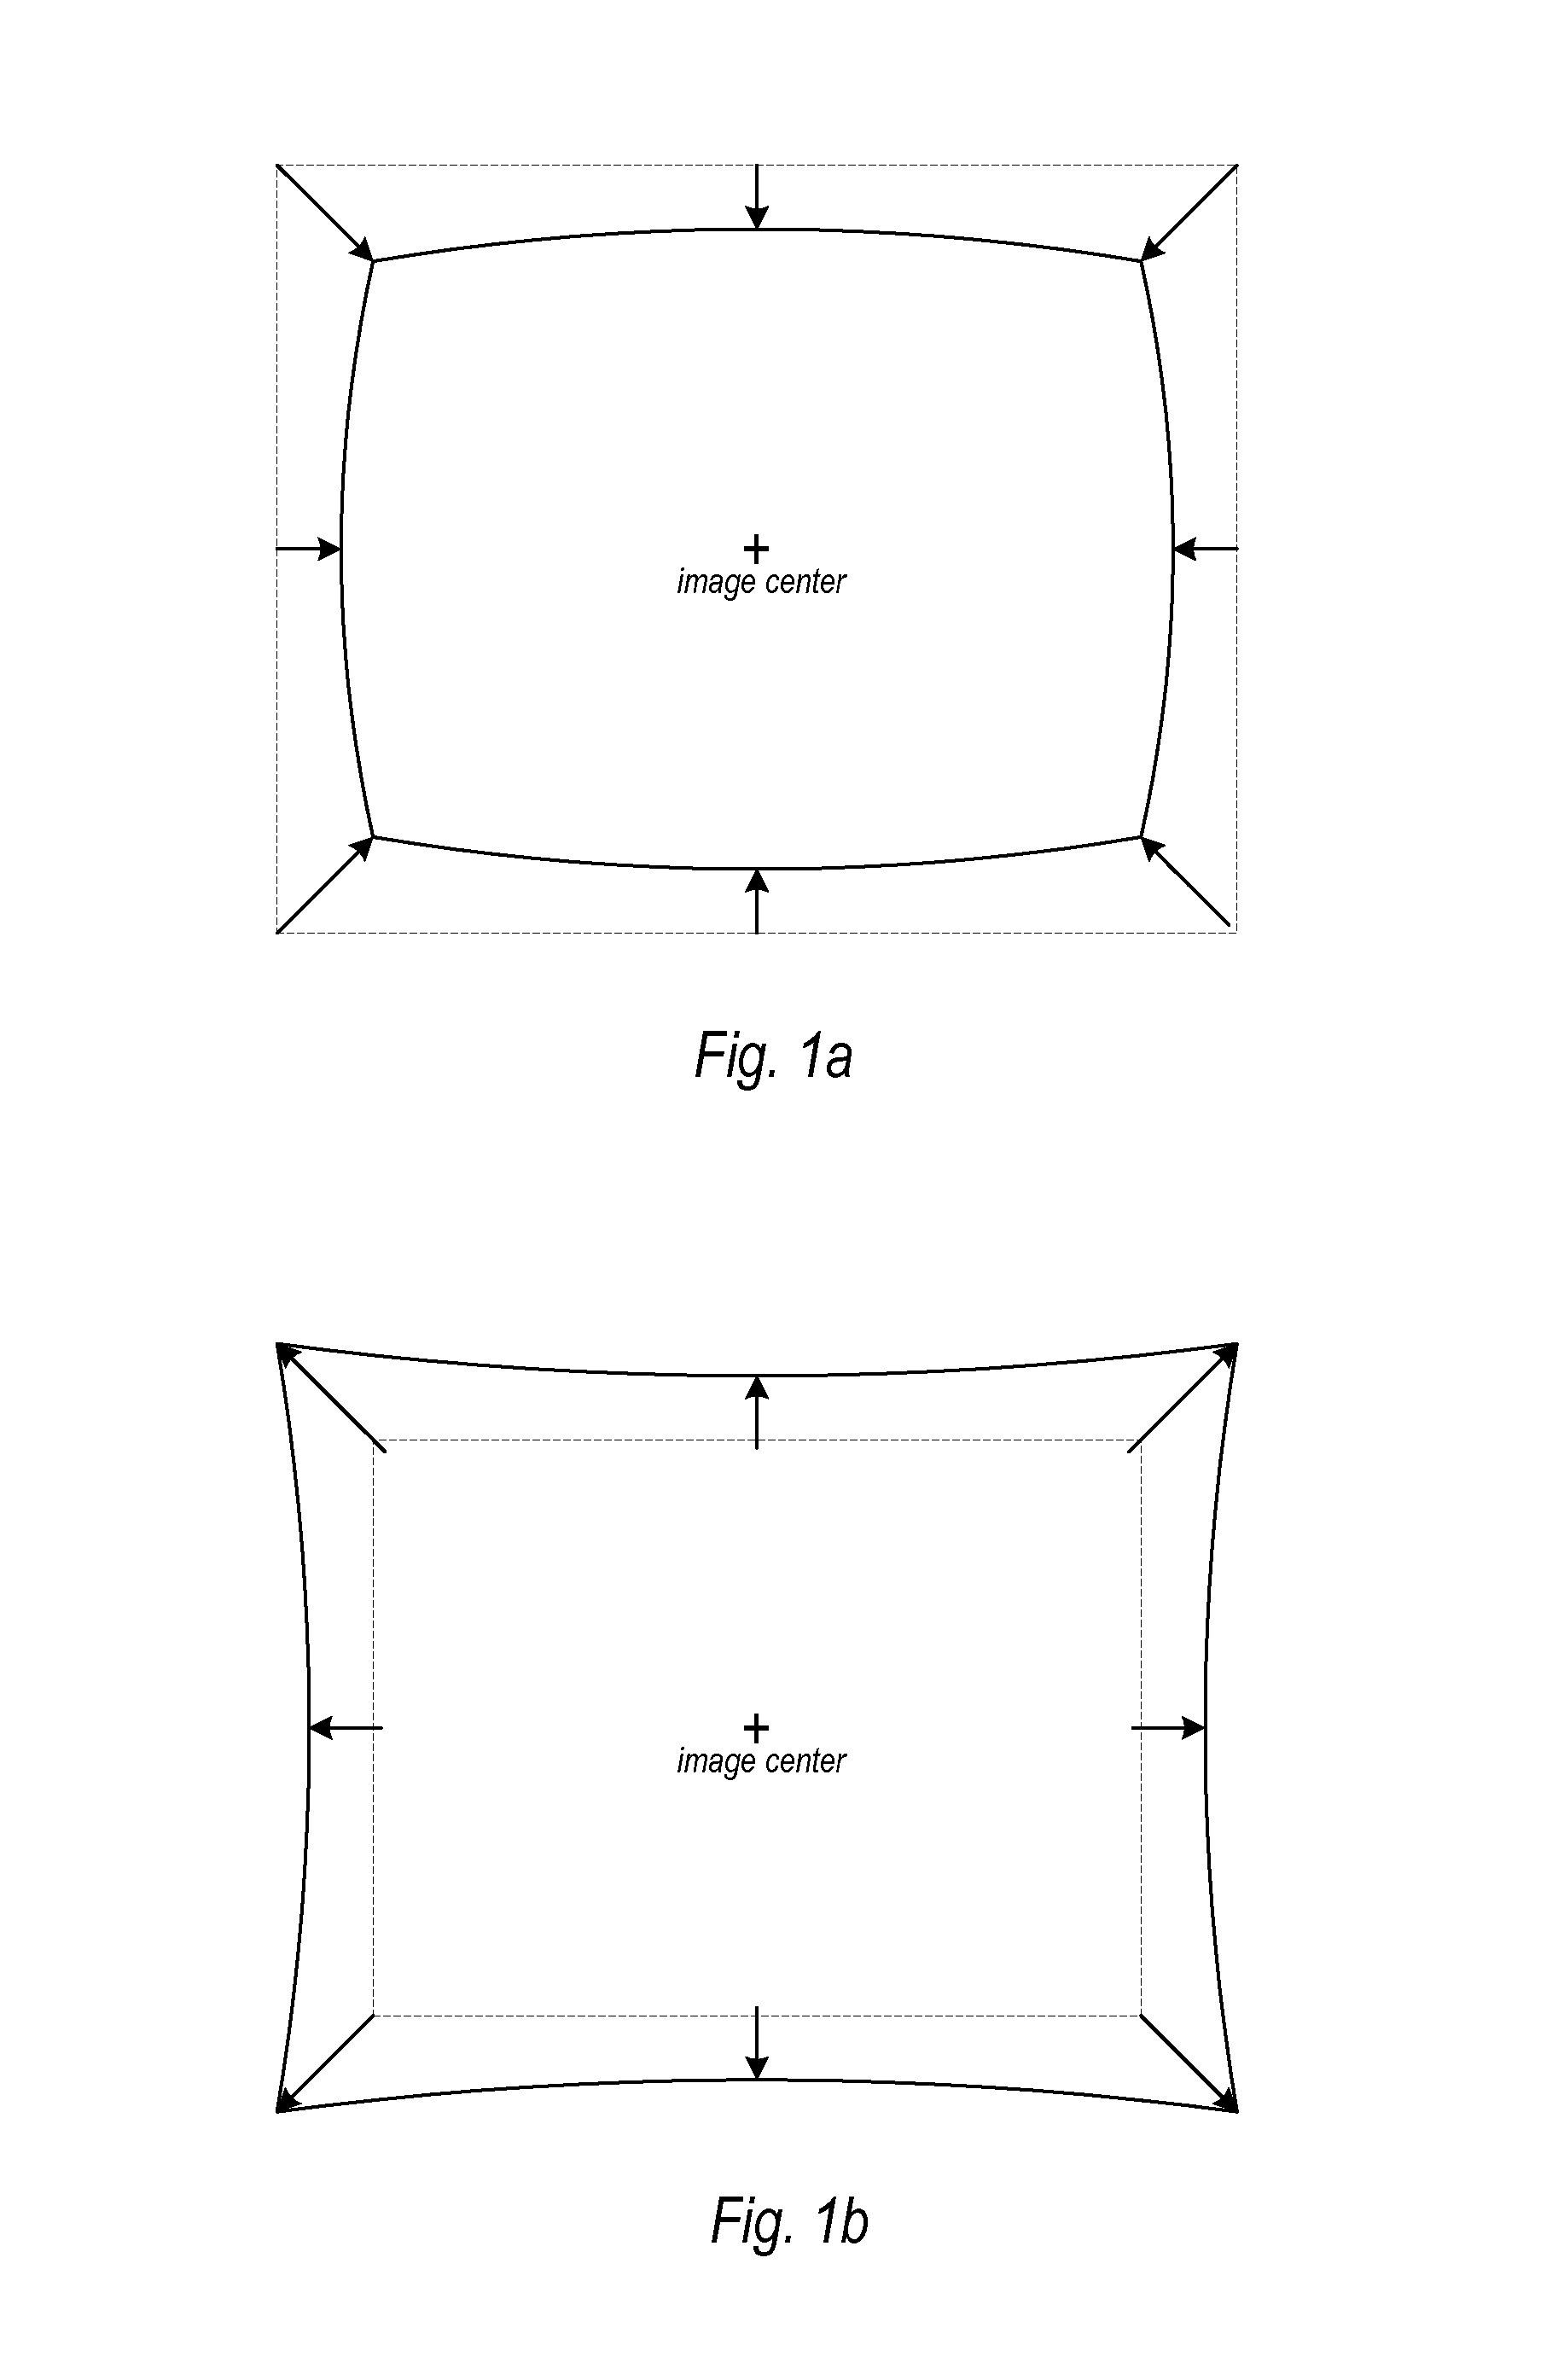 Methods and apparatus for camera calibration based on multiview image geometry